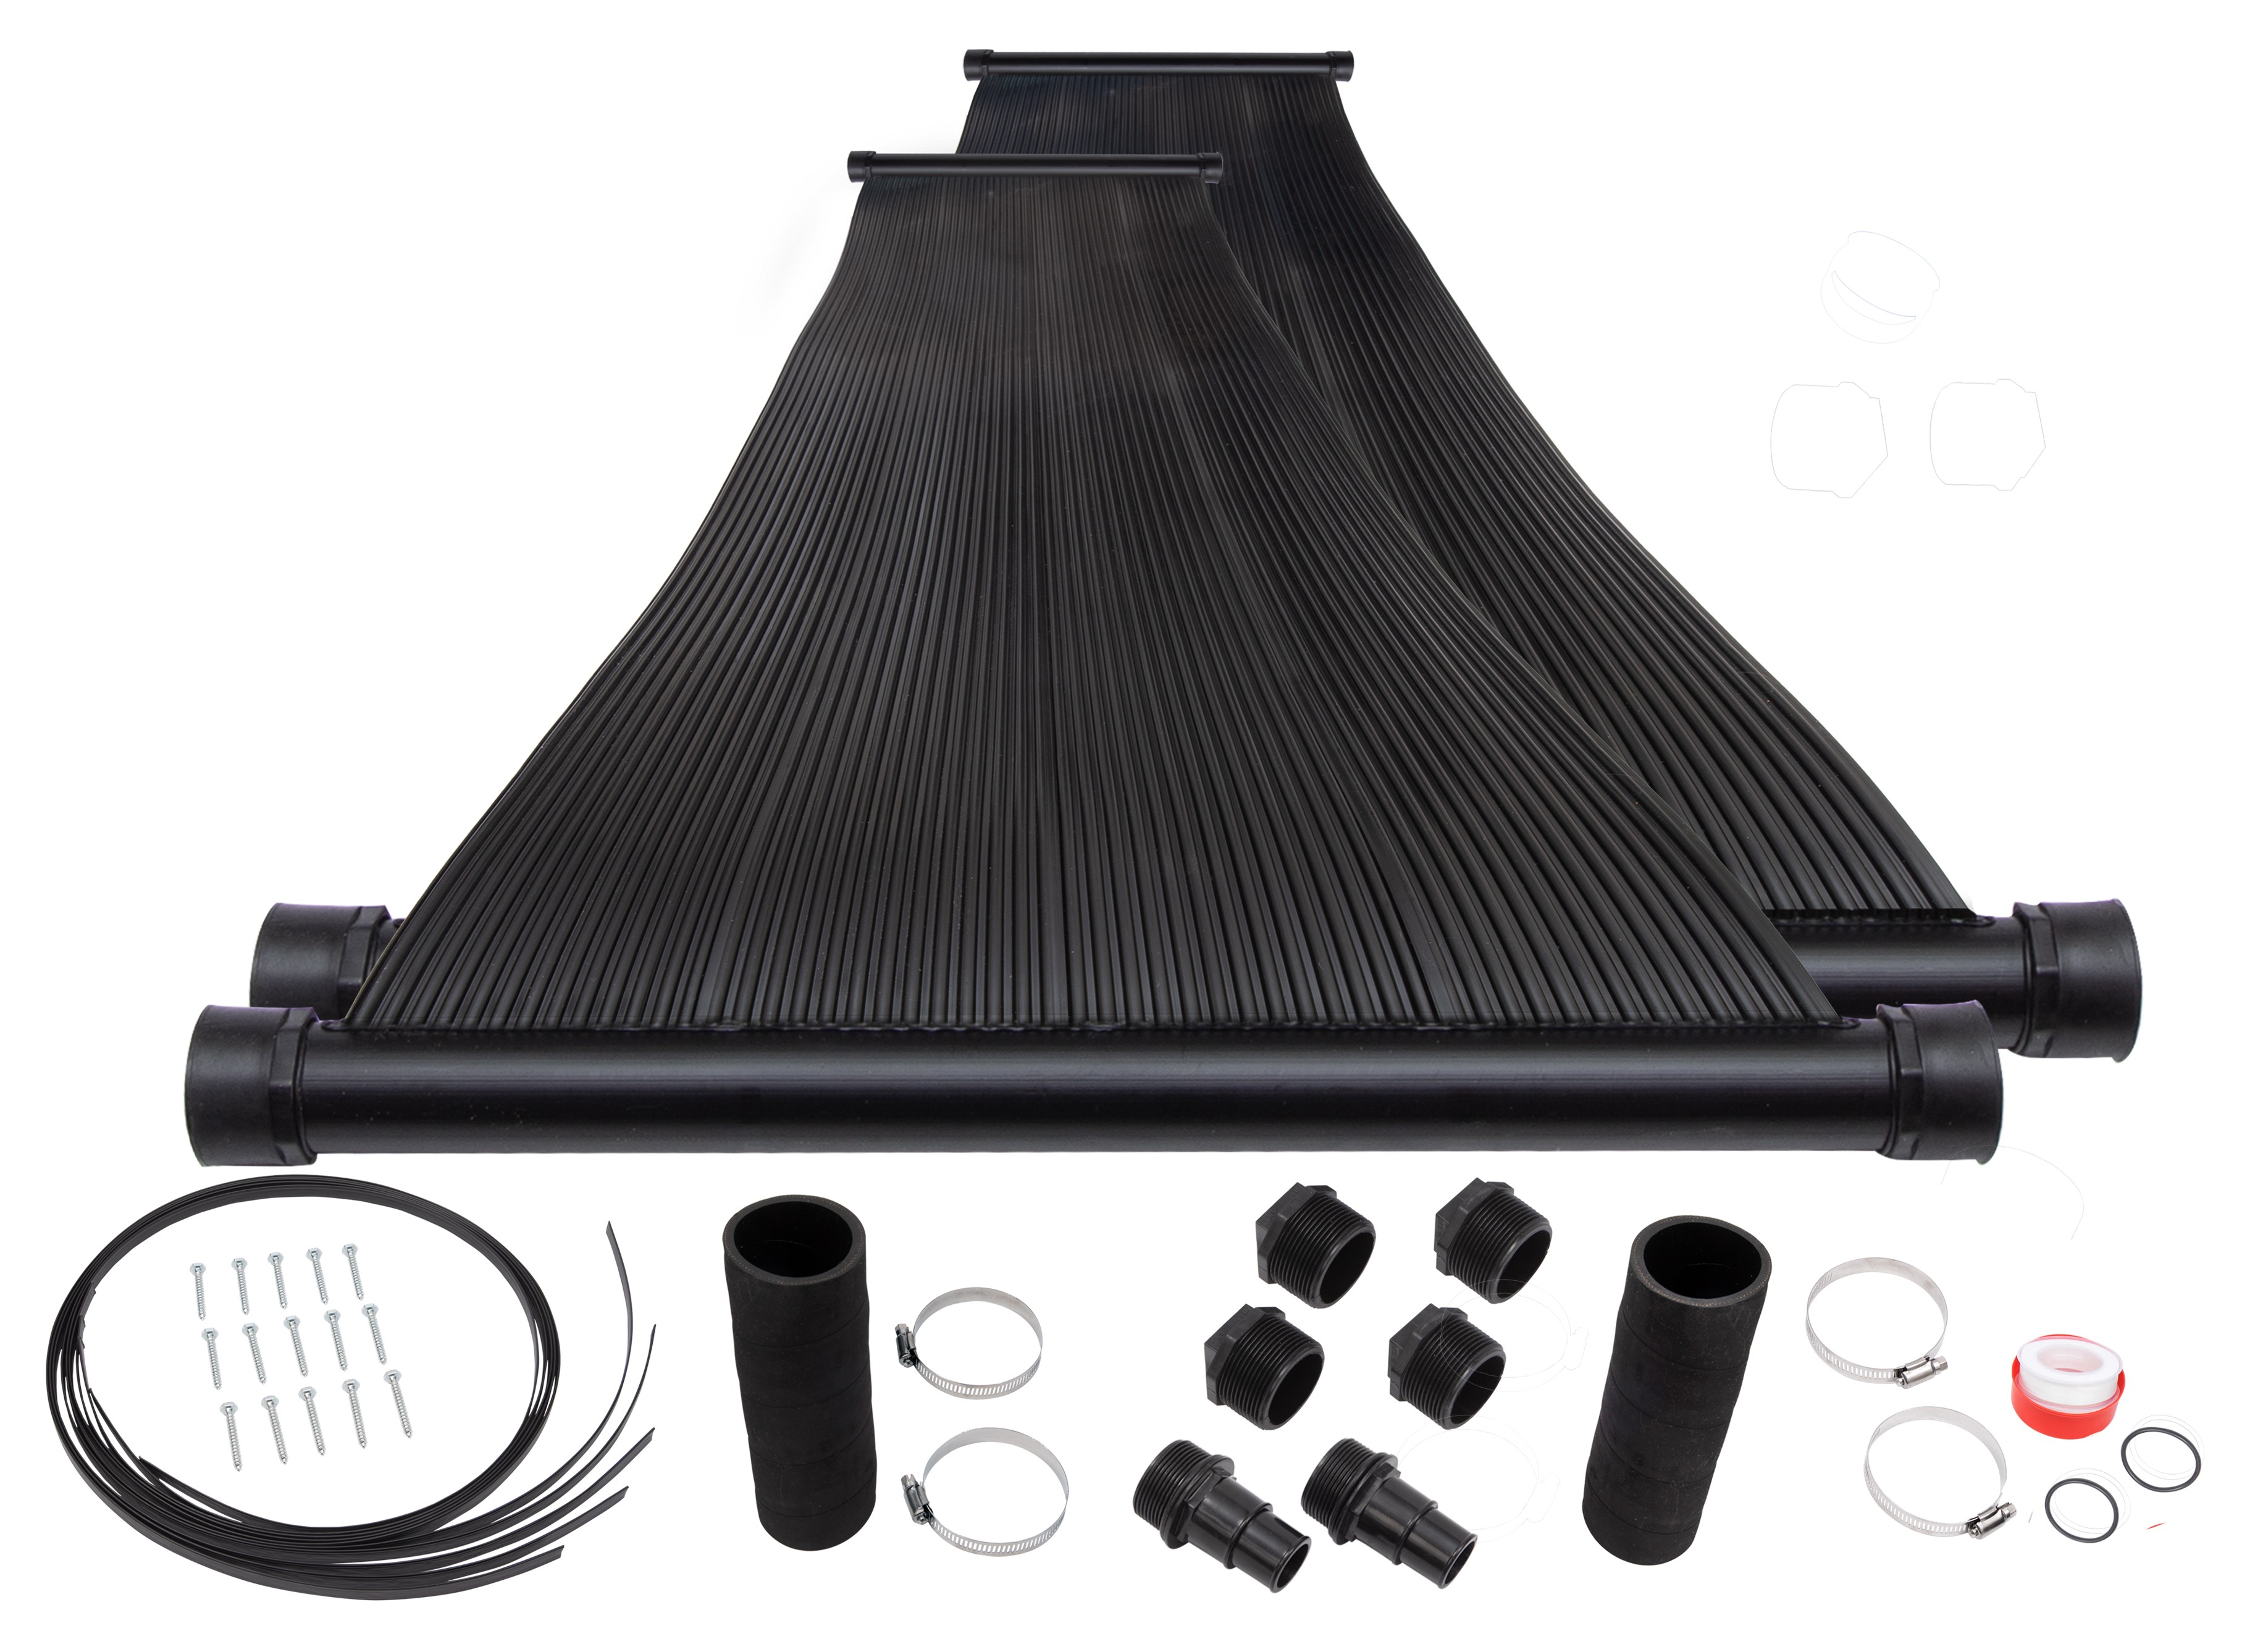 2-2'X12' SunQuest Solar Pool Heater with Couplers and Roof/Rack Mounting Kit